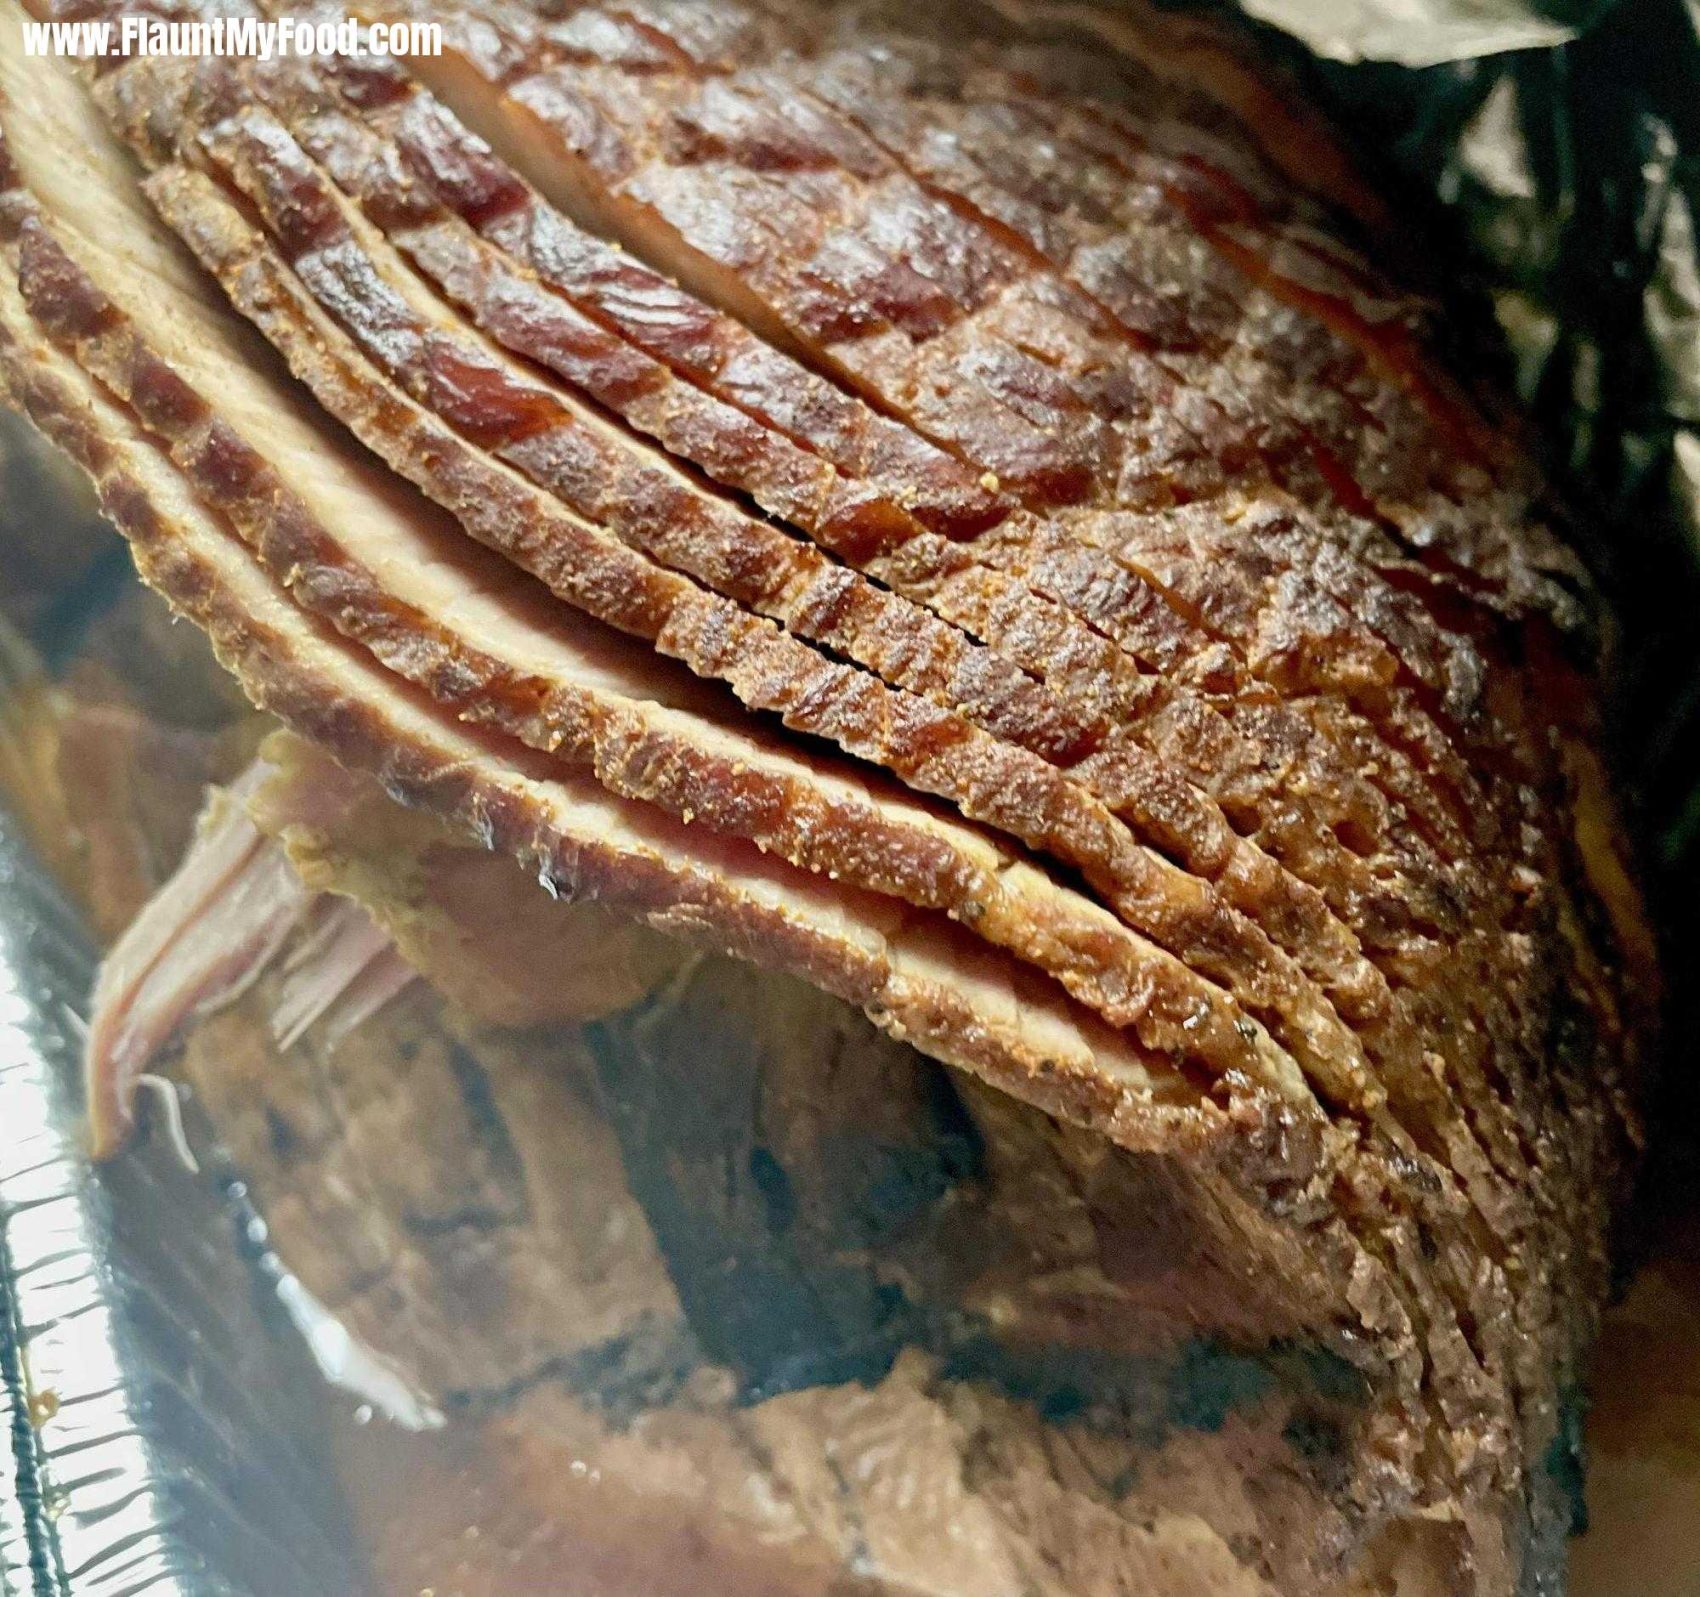 Smoked Christmas ham by KapQue in Fort Worth Texas